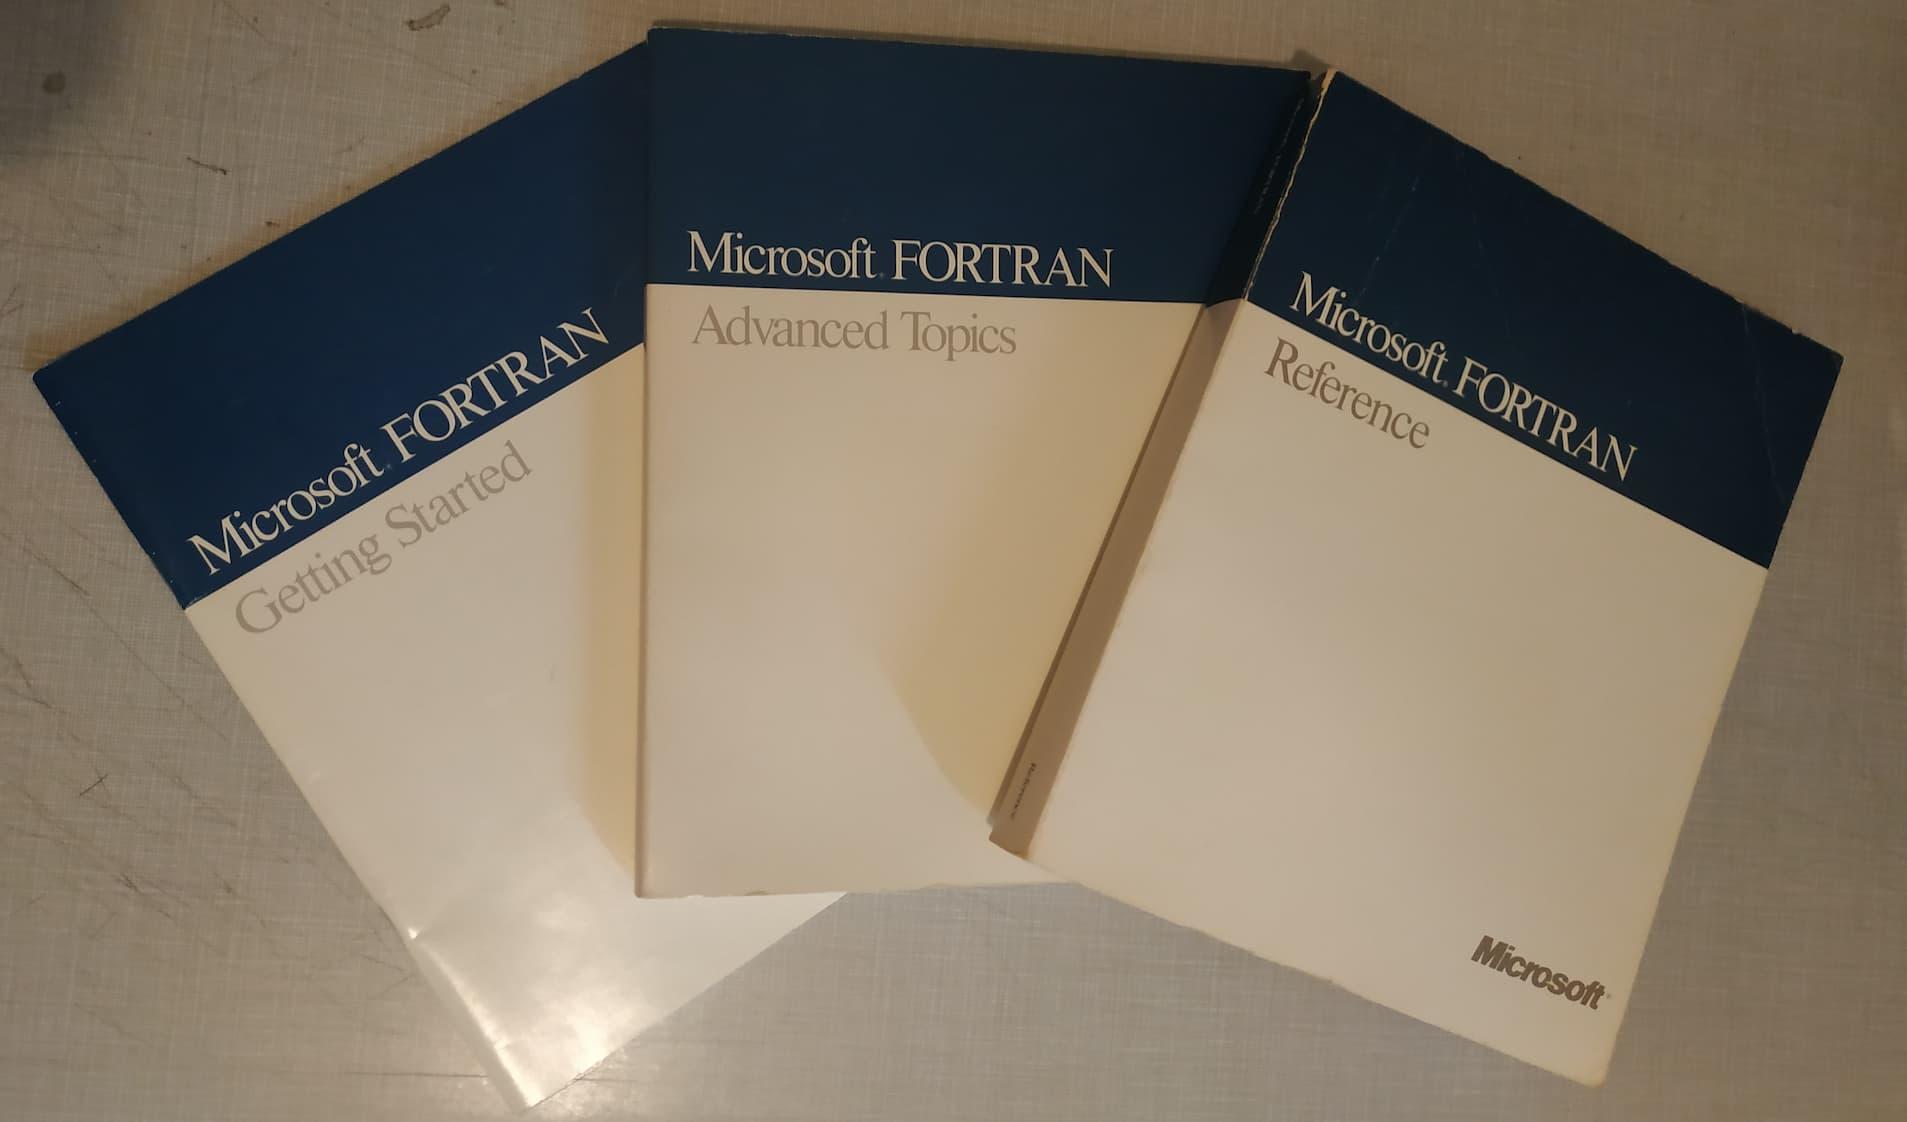 A pamphlet and two larger books on Microsoft FORTRAN are displayed on a table